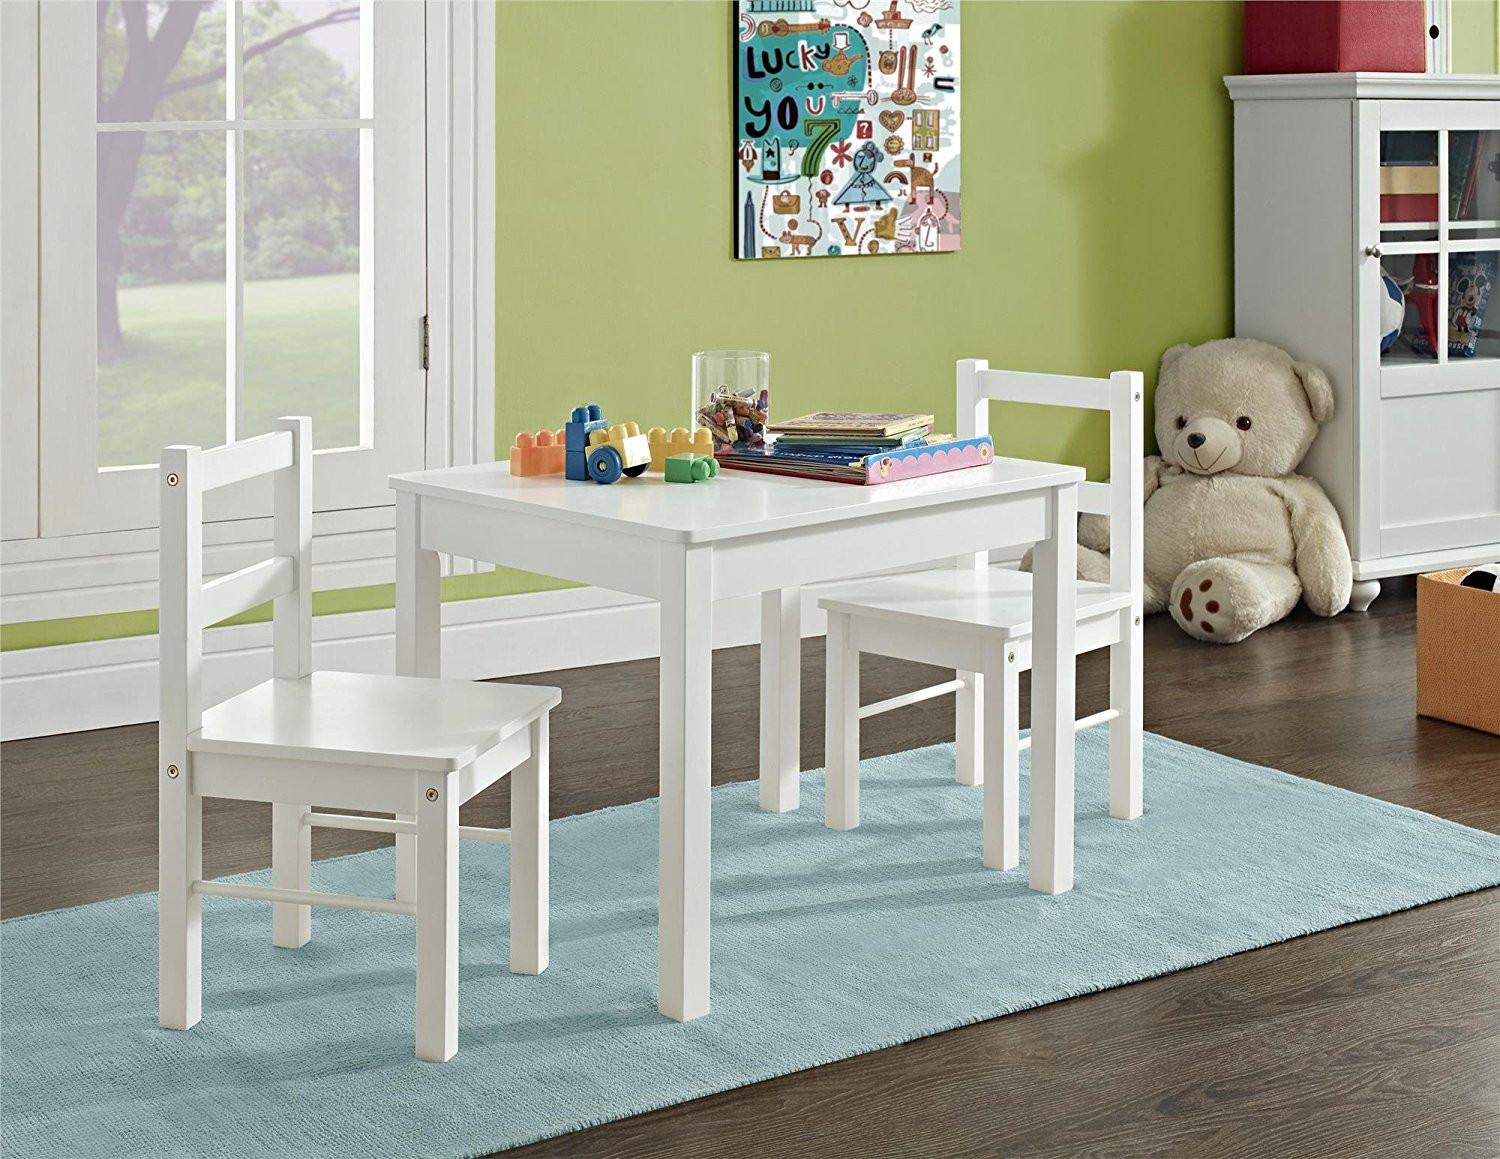 Kids Kitchen Table
 Kids Dining Table And Chair Set & Kids Furniture Kids